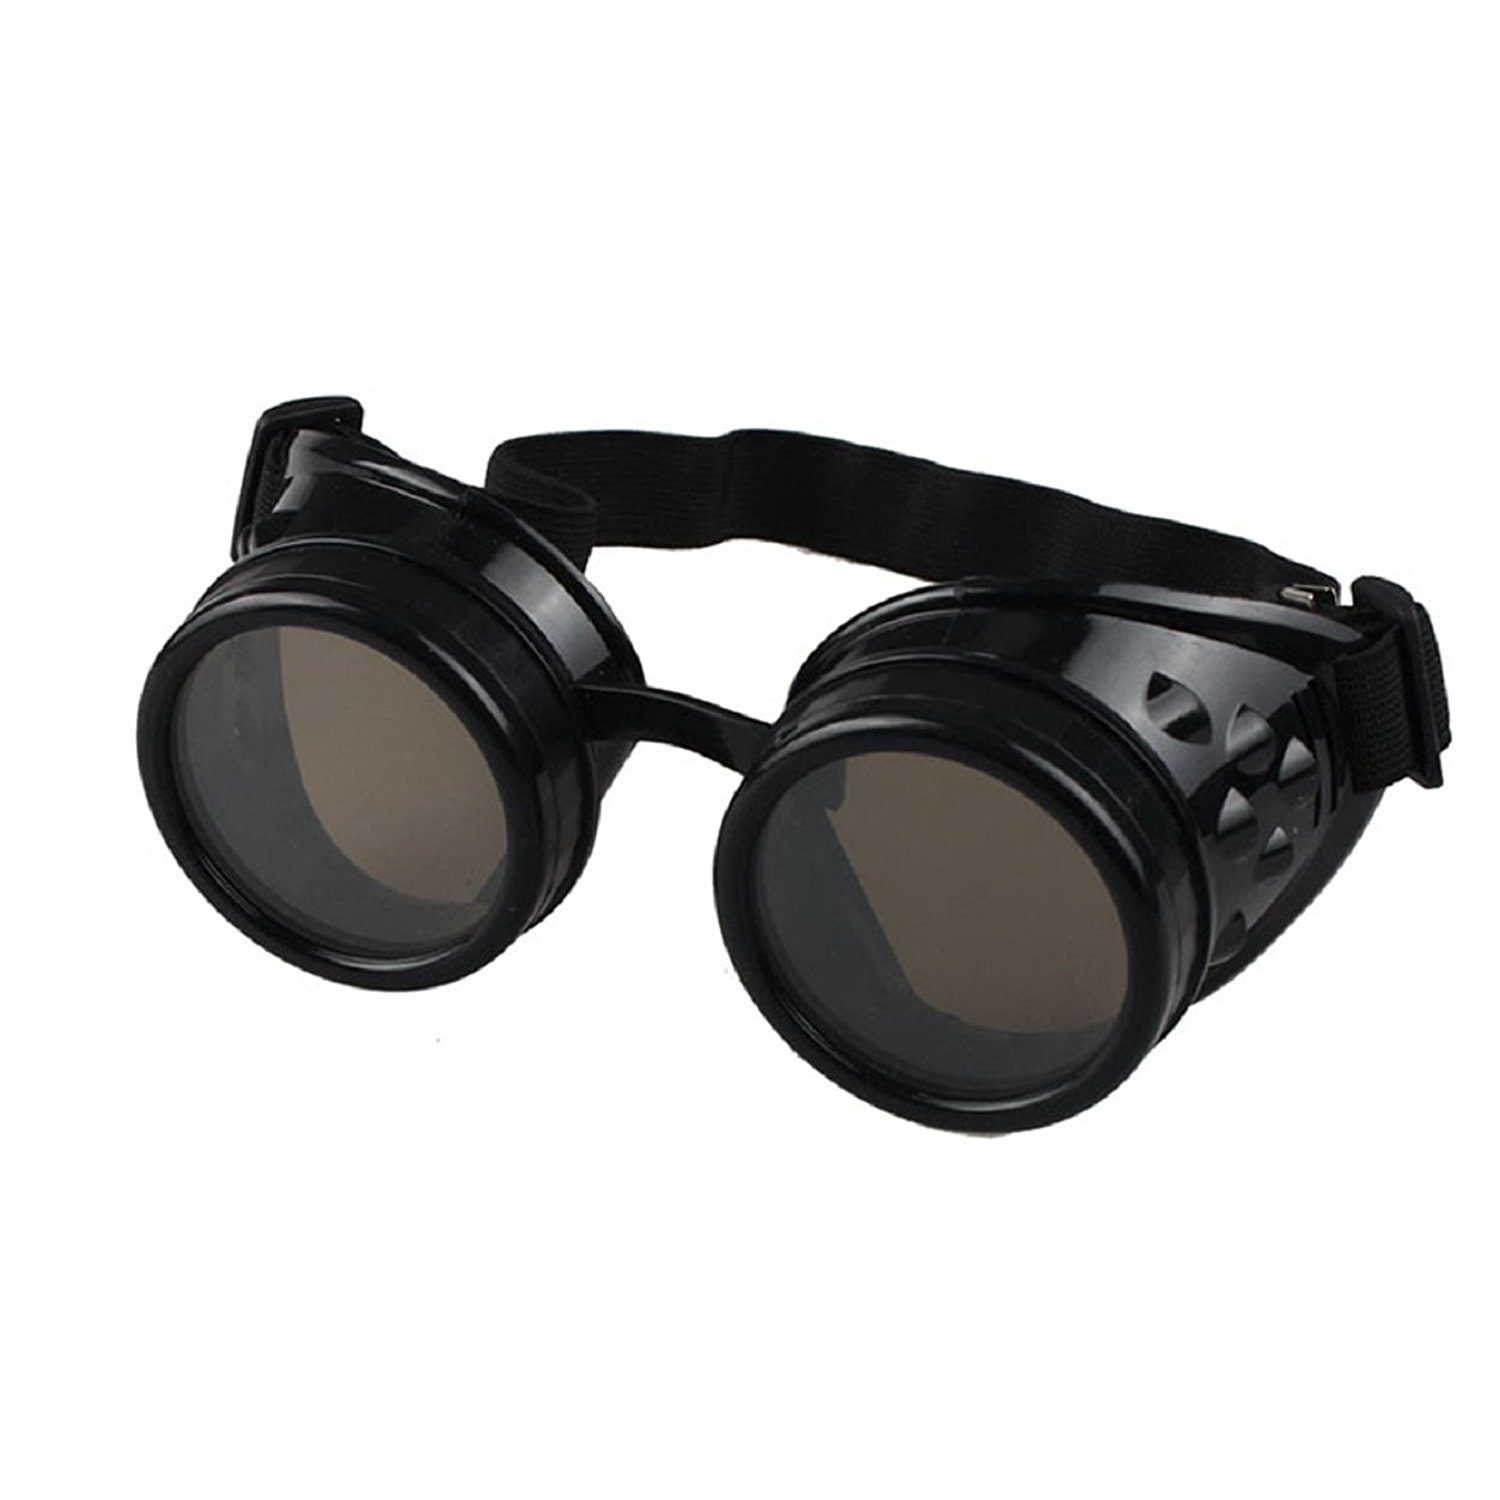 New Sell Vintage Steampunk Goggles Glasses Welding Cyber Punk Gothic 